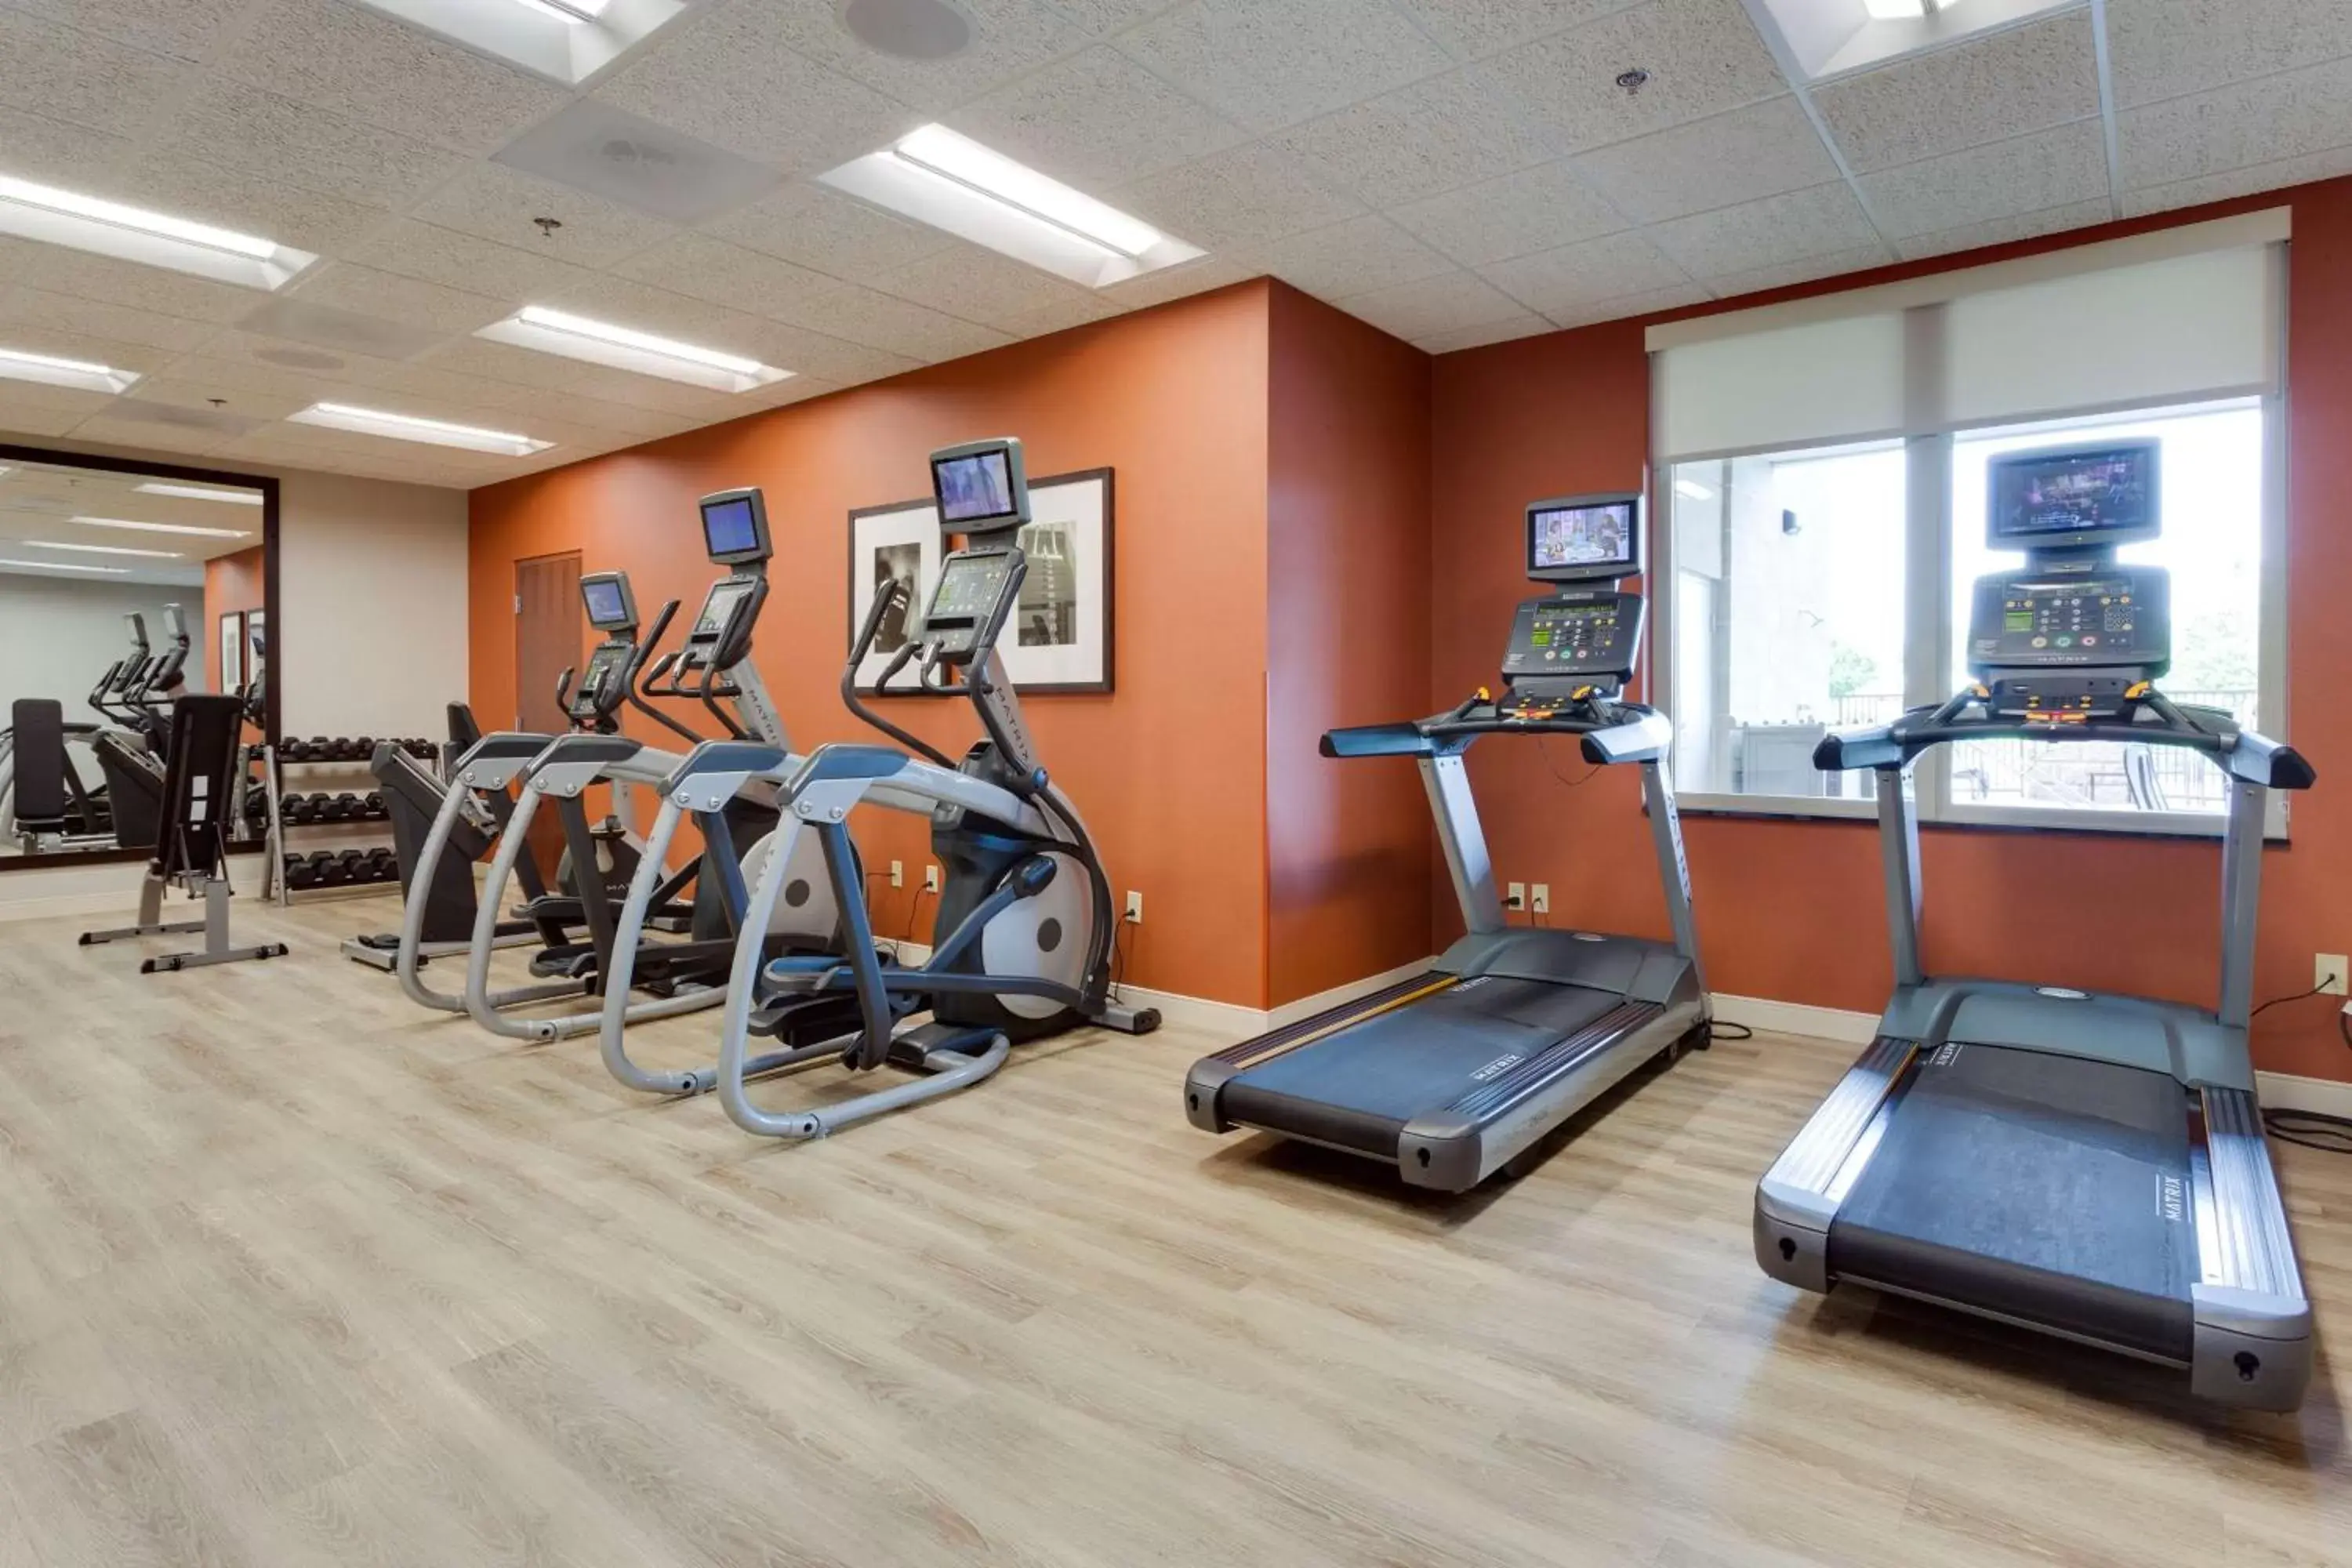 Activities, Fitness Center/Facilities in Drury Inn & Suites Fort Myers Airport FGCU